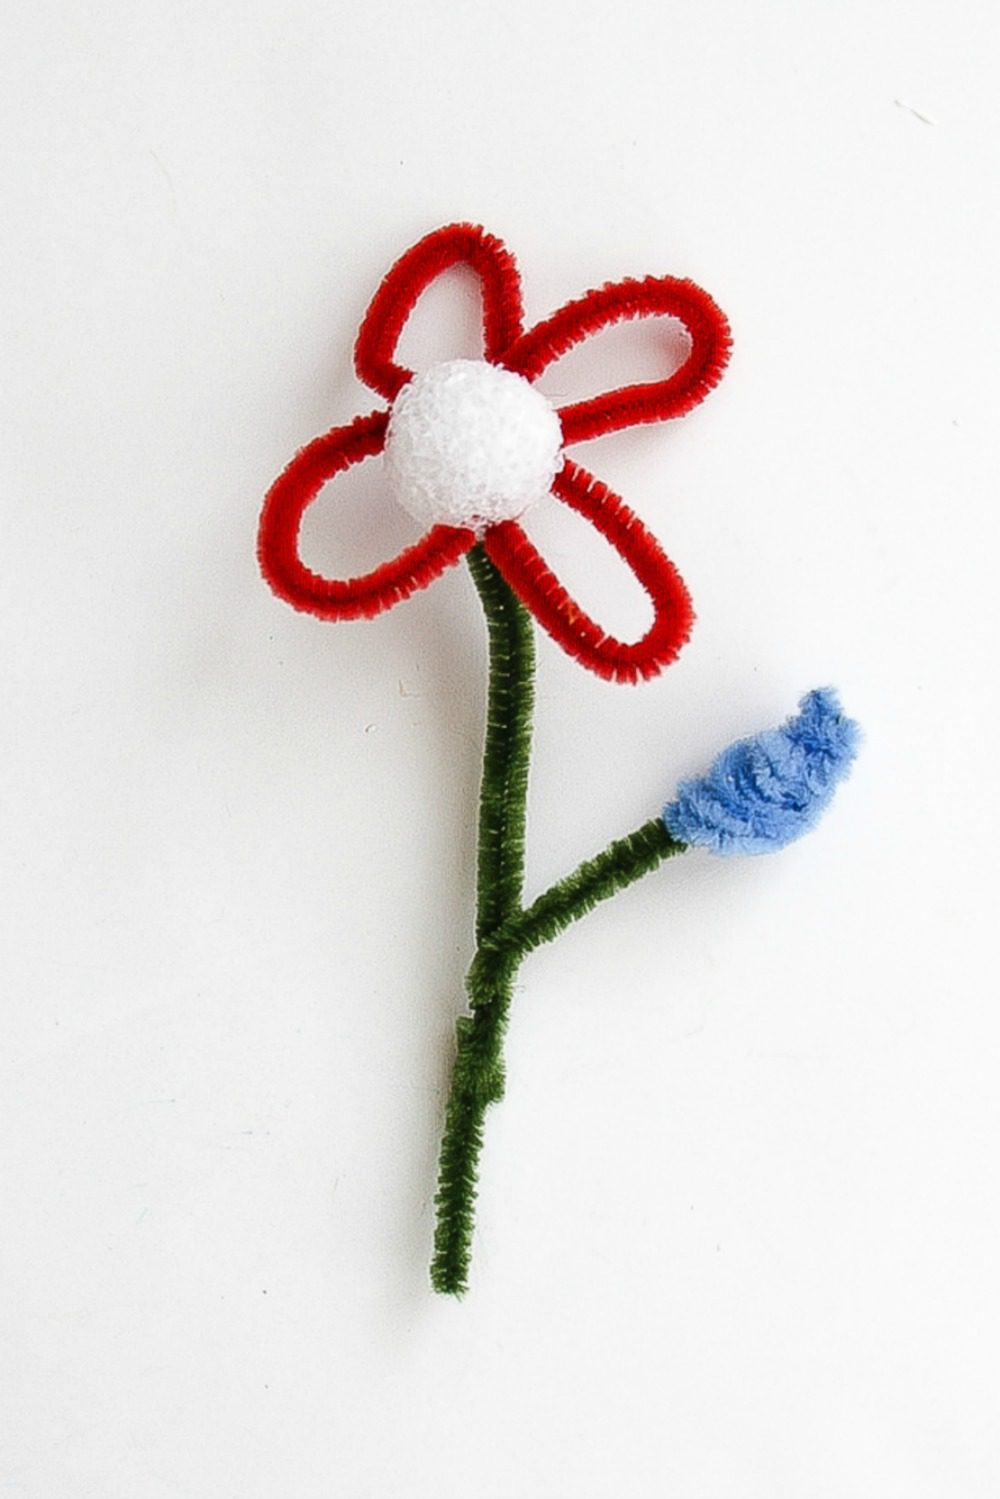 How to make spring flowers using pipe cleaners and foam balls.